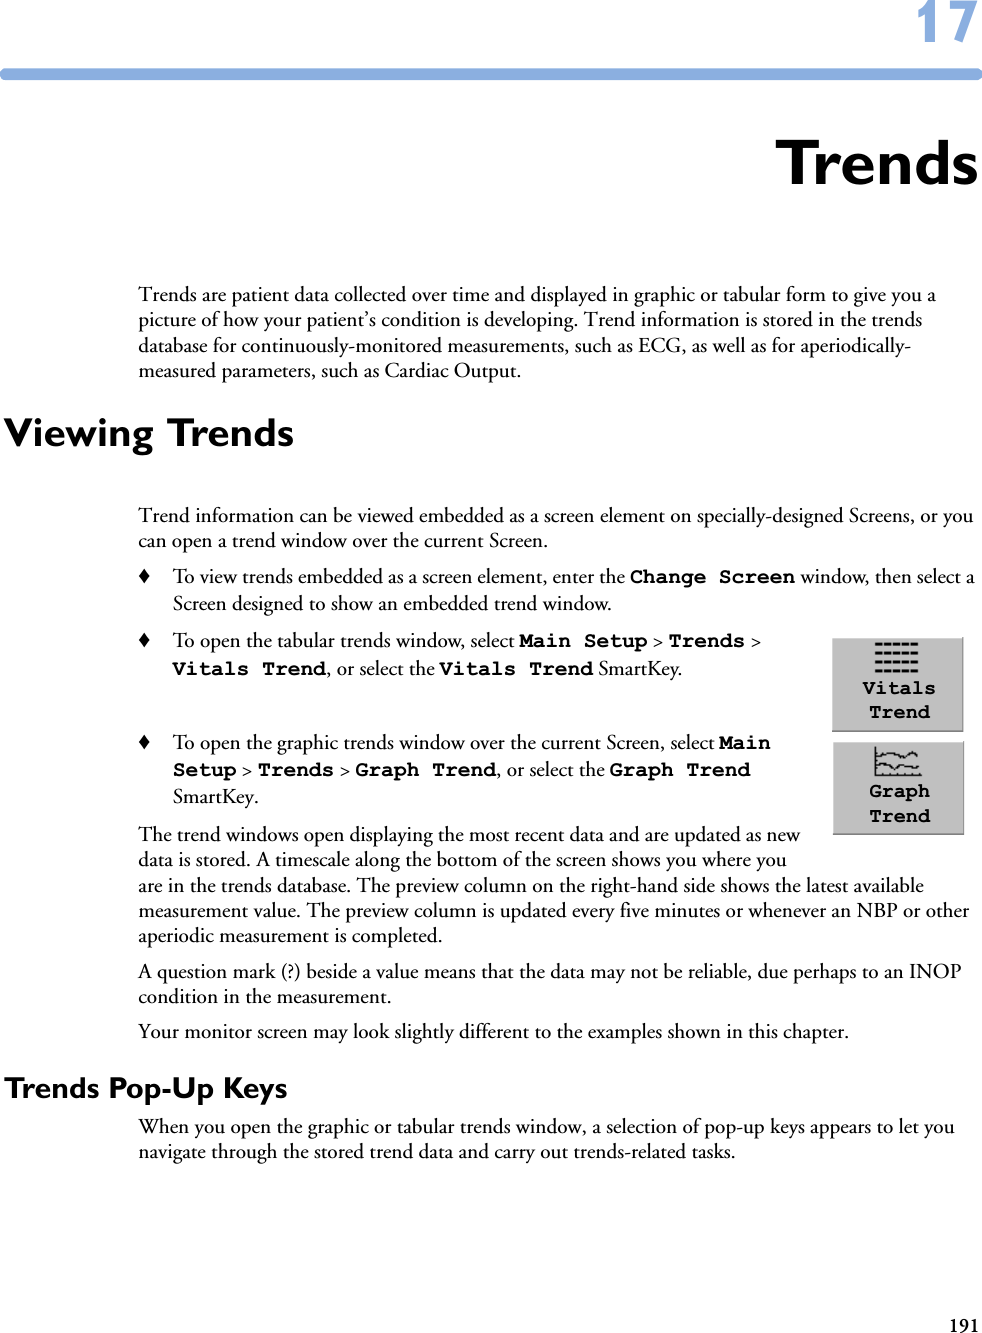 1911717TrendsTrends are patient data collected over time and displayed in graphic or tabular form to give you a picture of how your patient’s condition is developing. Trend information is stored in the trends database for continuously-monitored measurements, such as ECG, as well as for aperiodically-measured parameters, such as Cardiac Output.Viewing TrendsTrend information can be viewed embedded as a screen element on specially-designed Screens, or you can open a trend window over the current Screen. ♦To view trends embedded as a screen element, enter the Change Screen window, then select a Screen designed to show an embedded trend window.♦To open the tabular trends window, select Main Setup &gt; Trends &gt; Vitals Trend, or select the Vitals Trend SmartKey. ♦To open the graphic trends window over the current Screen, select Main Setup &gt; Trends &gt; Graph Trend, or select the Graph Trend SmartKey.The trend windows open displaying the most recent data and are updated as new data is stored. A timescale along the bottom of the screen shows you where you are in the trends database. The preview column on the right-hand side shows the latest available measurement value. The preview column is updated every five minutes or whenever an NBP or other aperiodic measurement is completed. A question mark (?) beside a value means that the data may not be reliable, due perhaps to an INOP condition in the measurement. Your monitor screen may look slightly different to the examples shown in this chapter.Trends Pop-Up KeysWhen you open the graphic or tabular trends window, a selection of pop-up keys appears to let you navigate through the stored trend data and carry out trends-related tasks.Vitals TrendGraph Trend